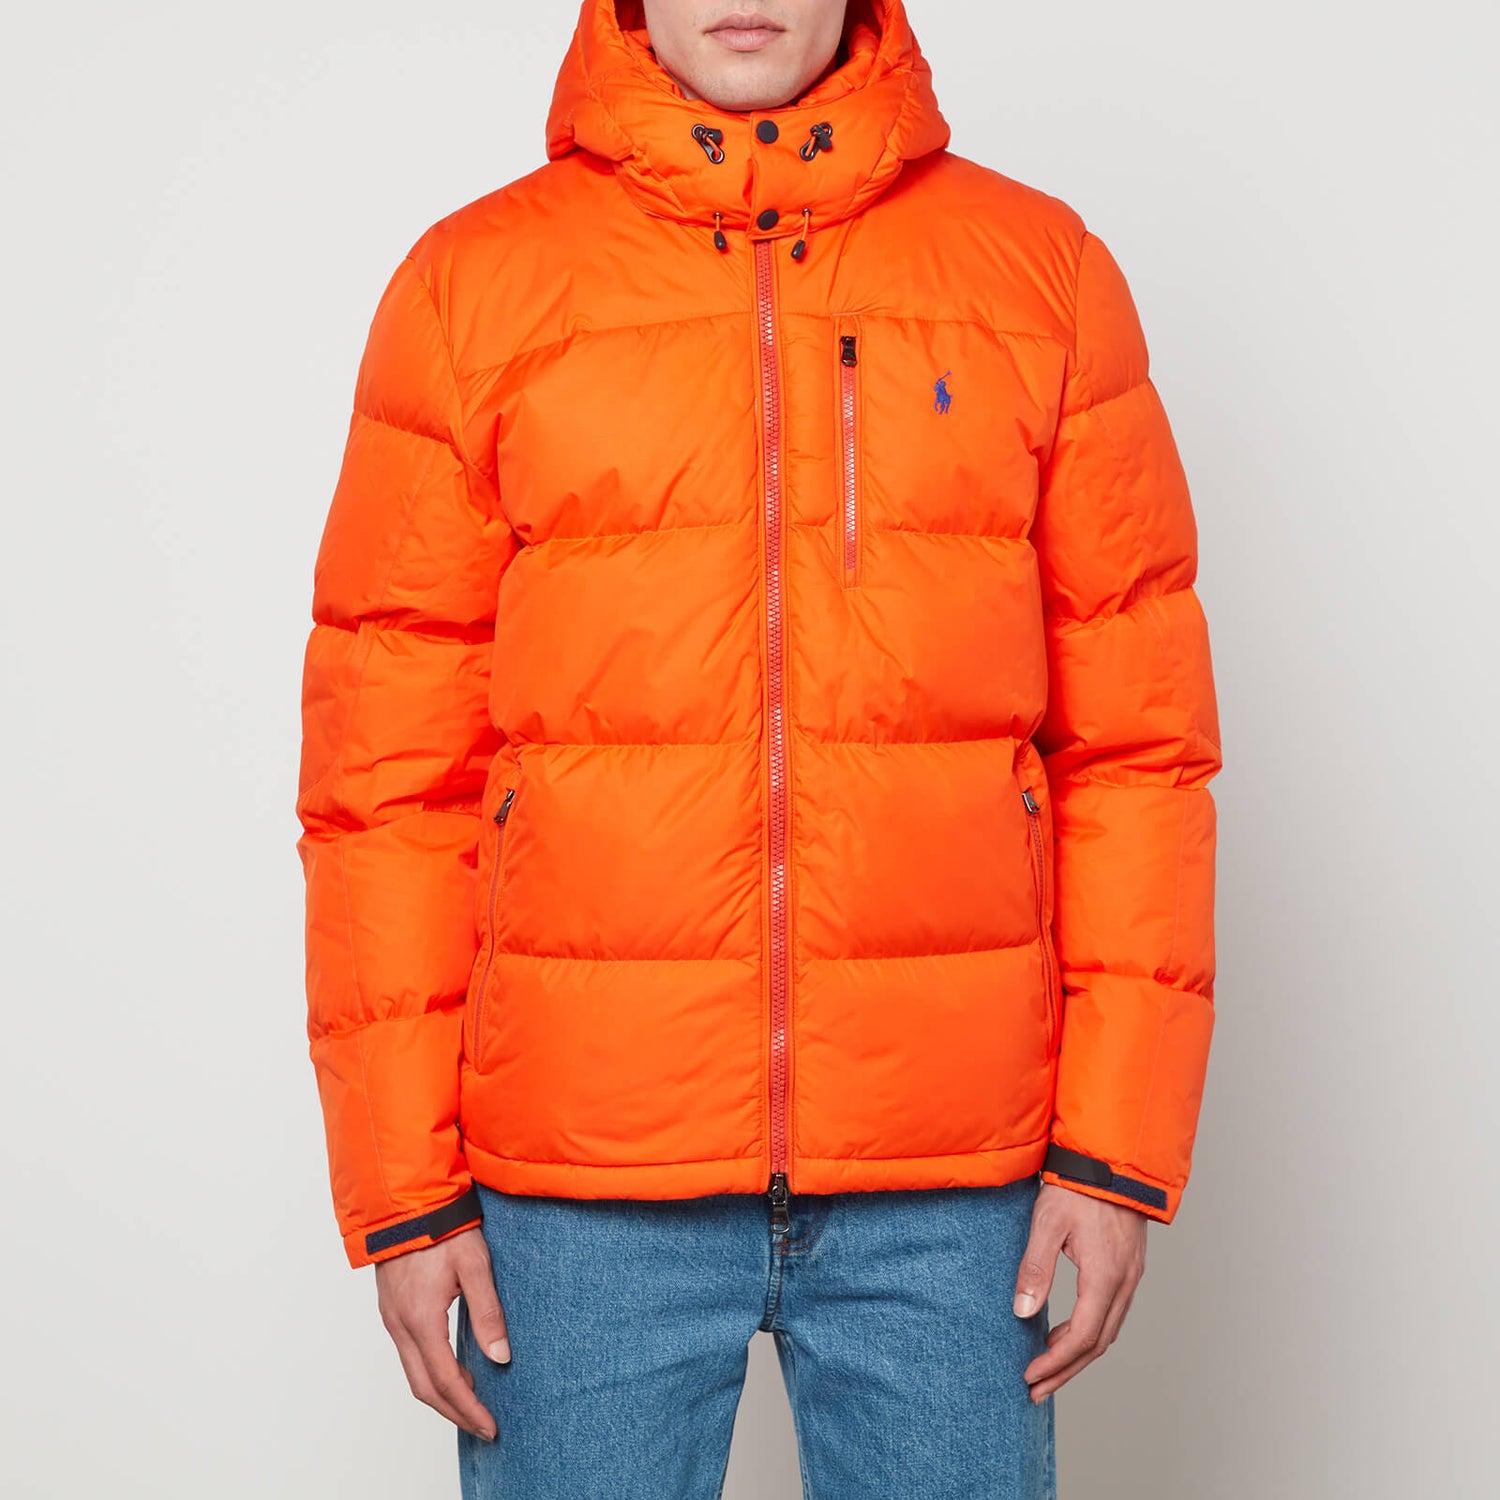 Polo Ralph Lauren Padded Shell and Nylon Puffer Jacket - L